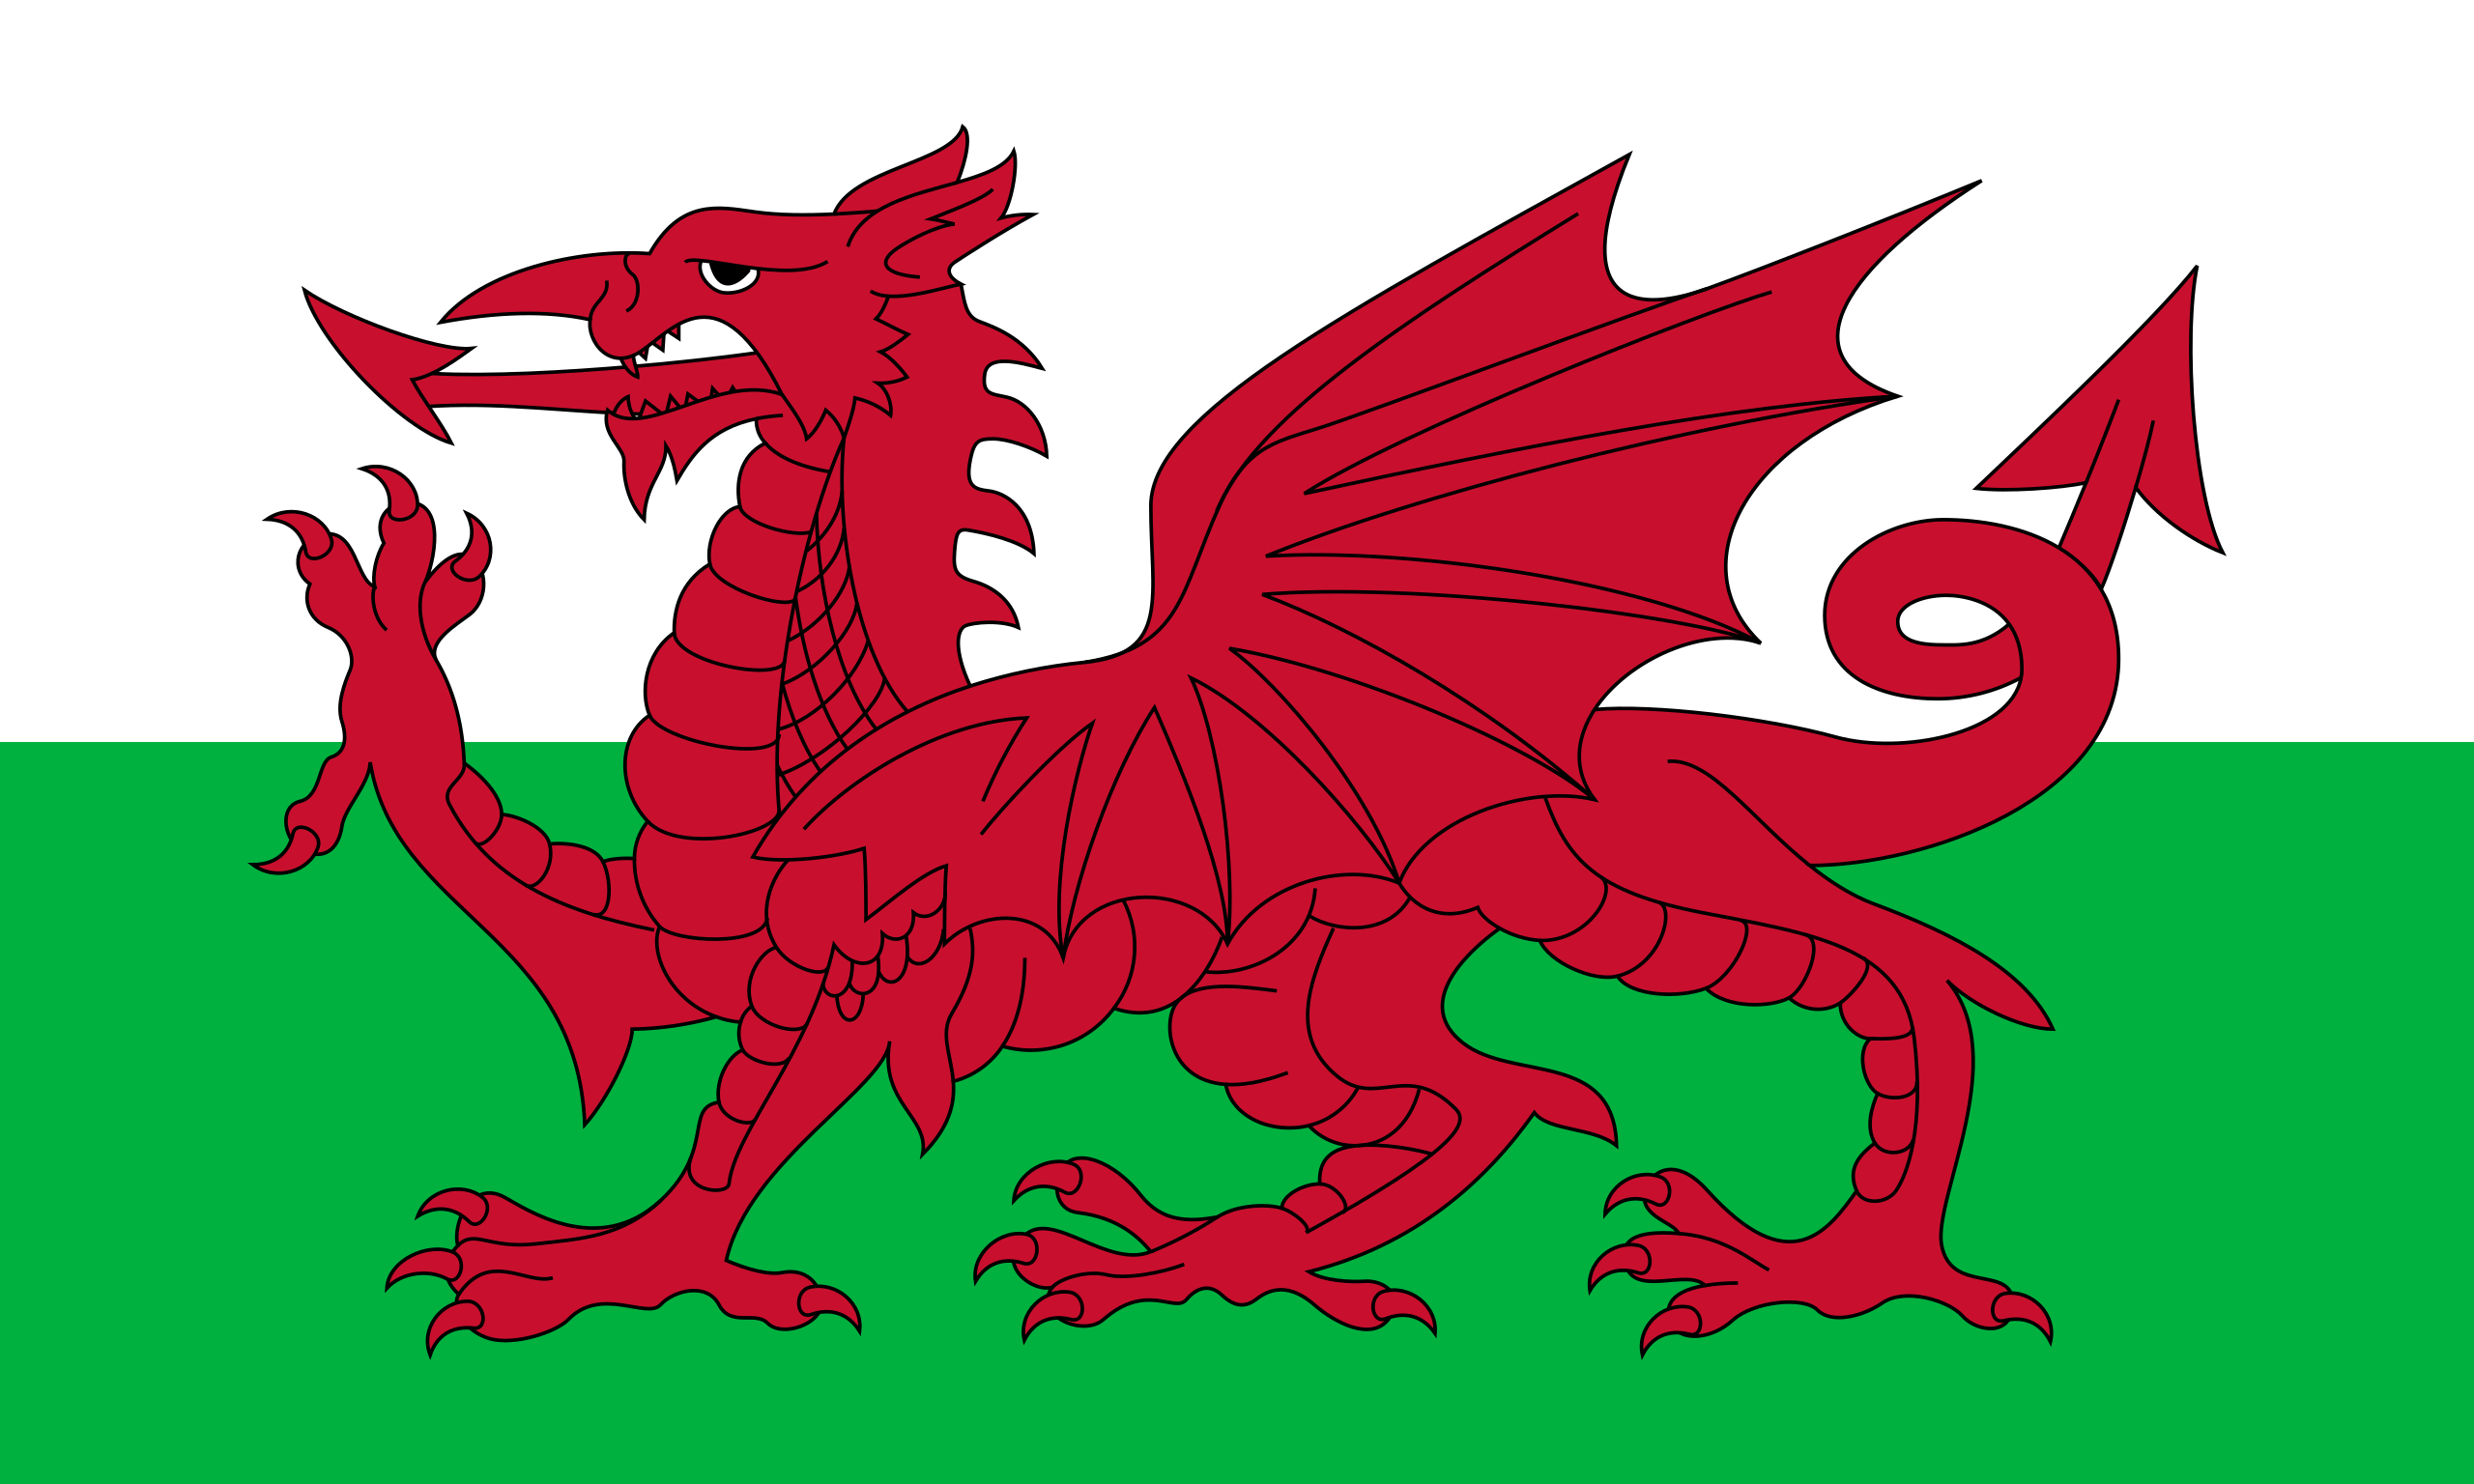 2560px-Flag_of_Wales.svg.png